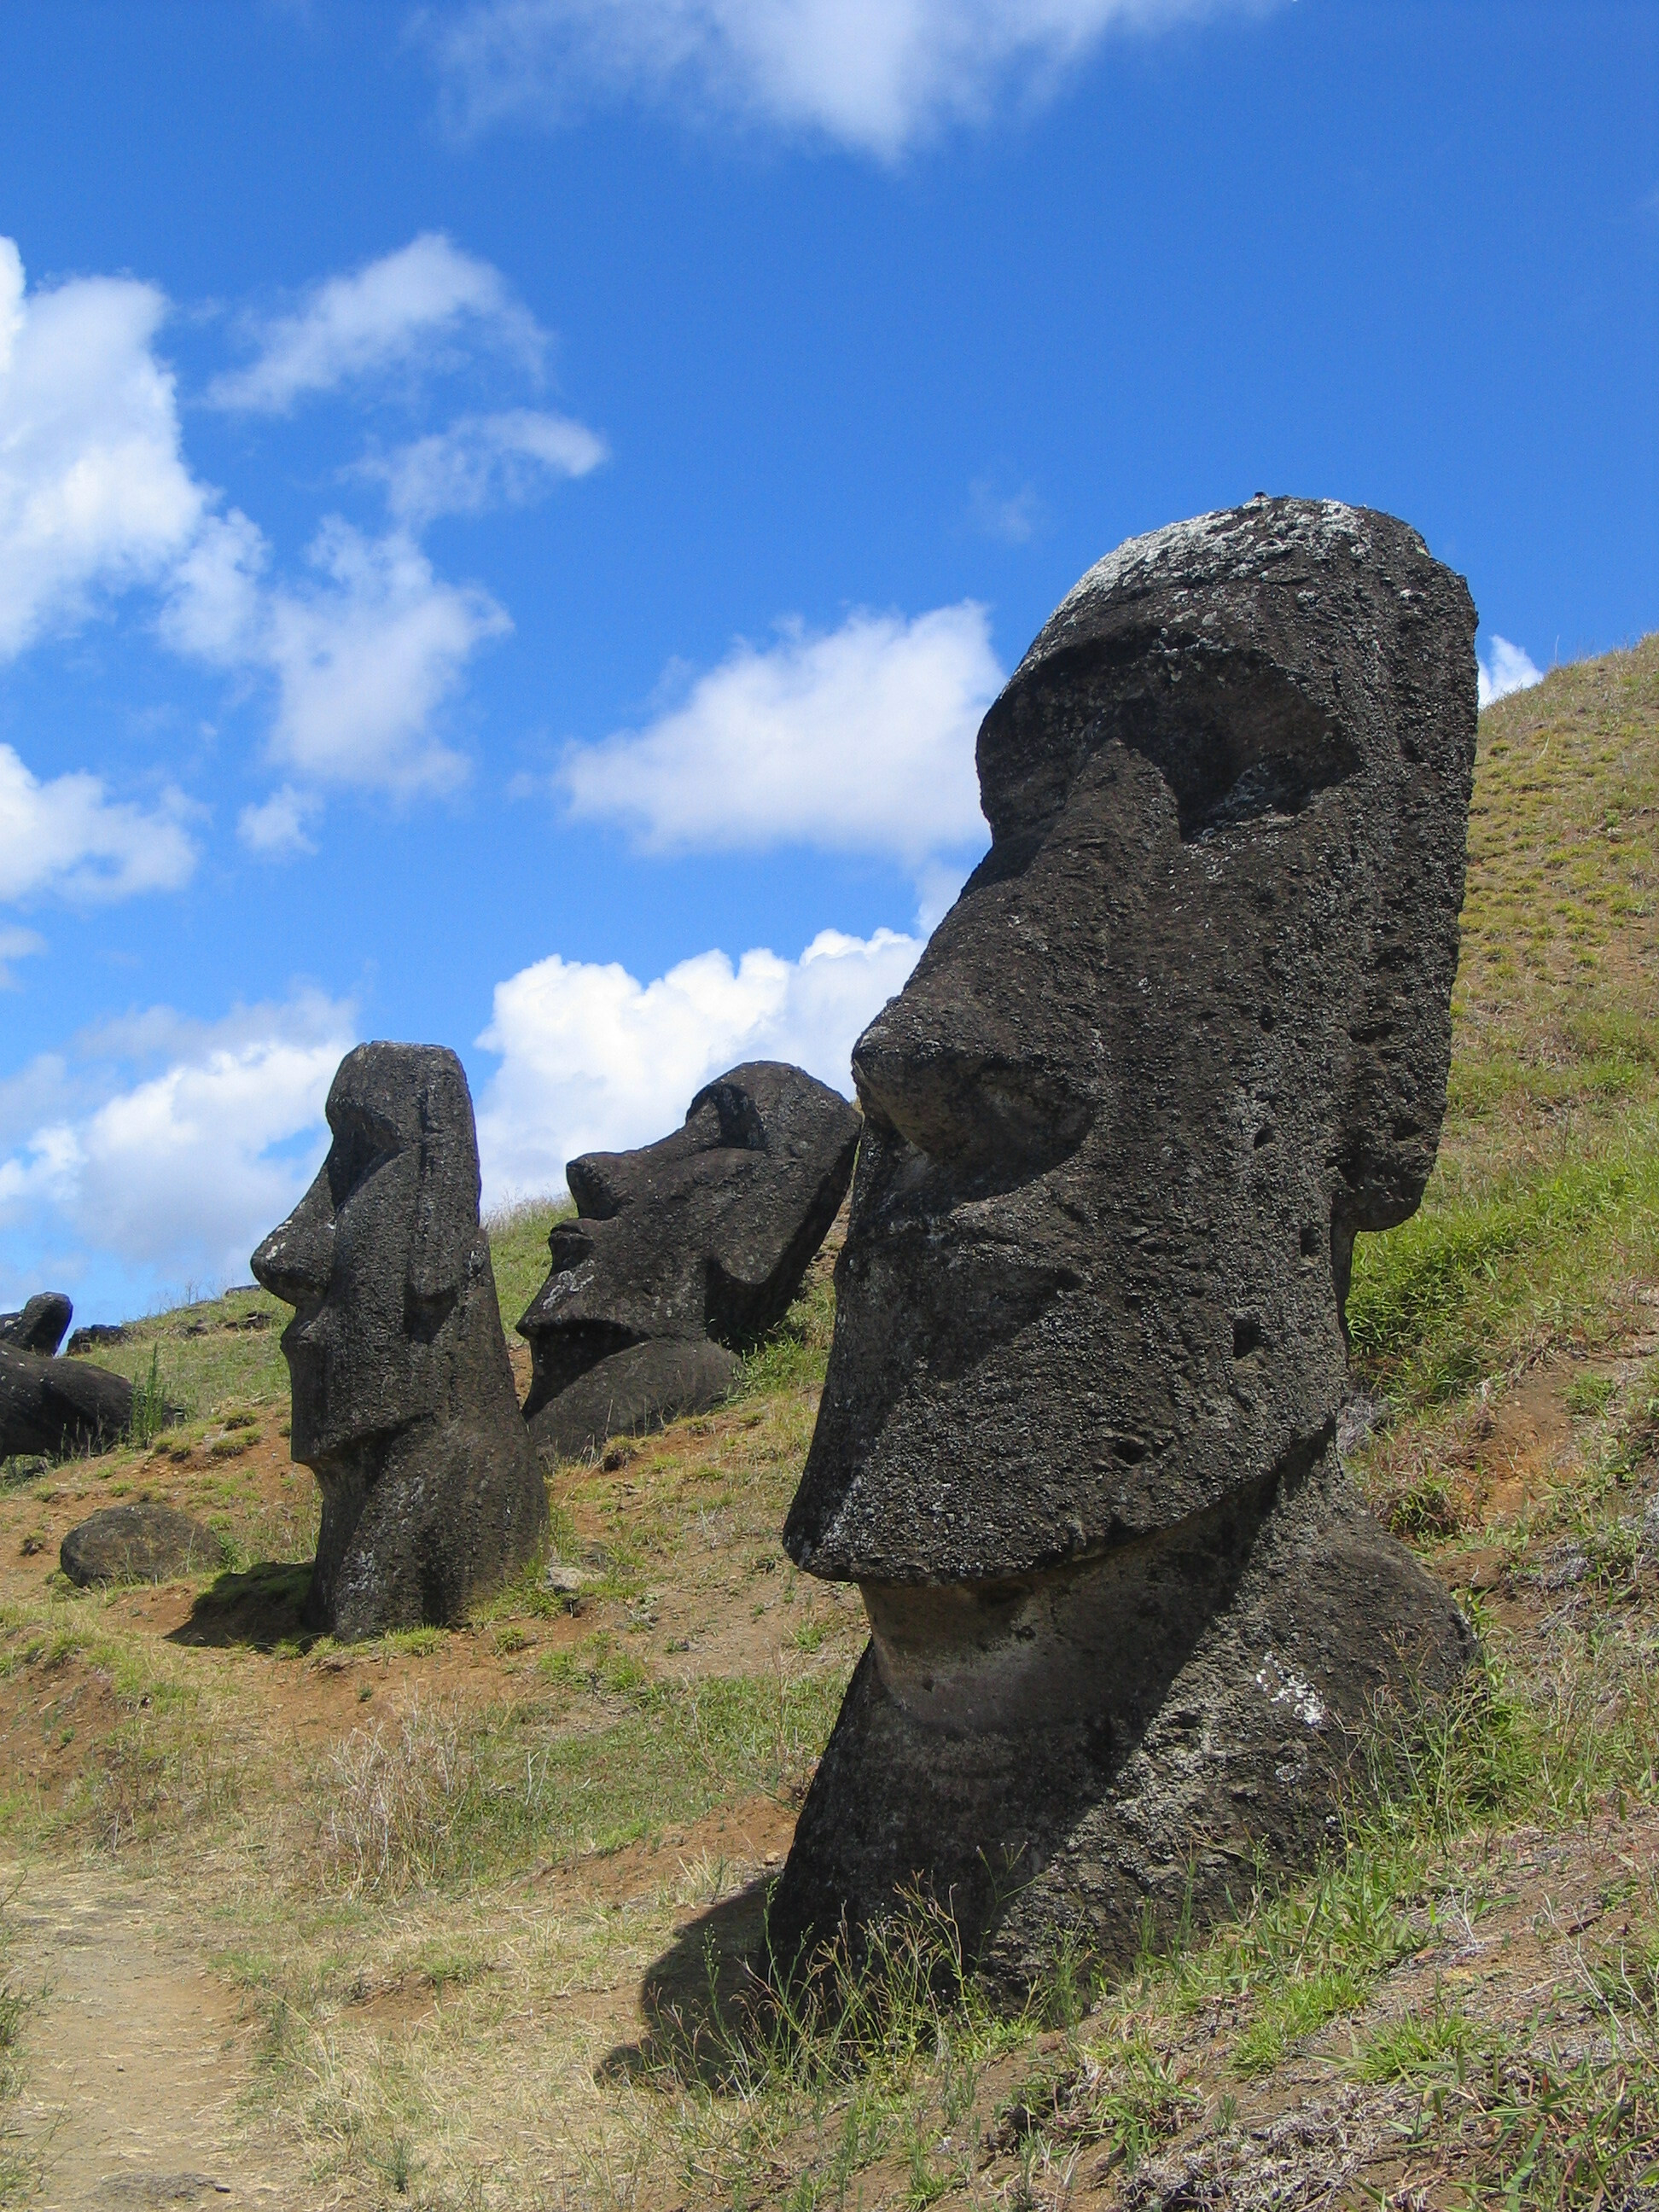 Moai: The heaviest statue erected was a squatter statue at Ahu Tongariki, weighing 86 tonnes. 1950x2600 HD Wallpaper.